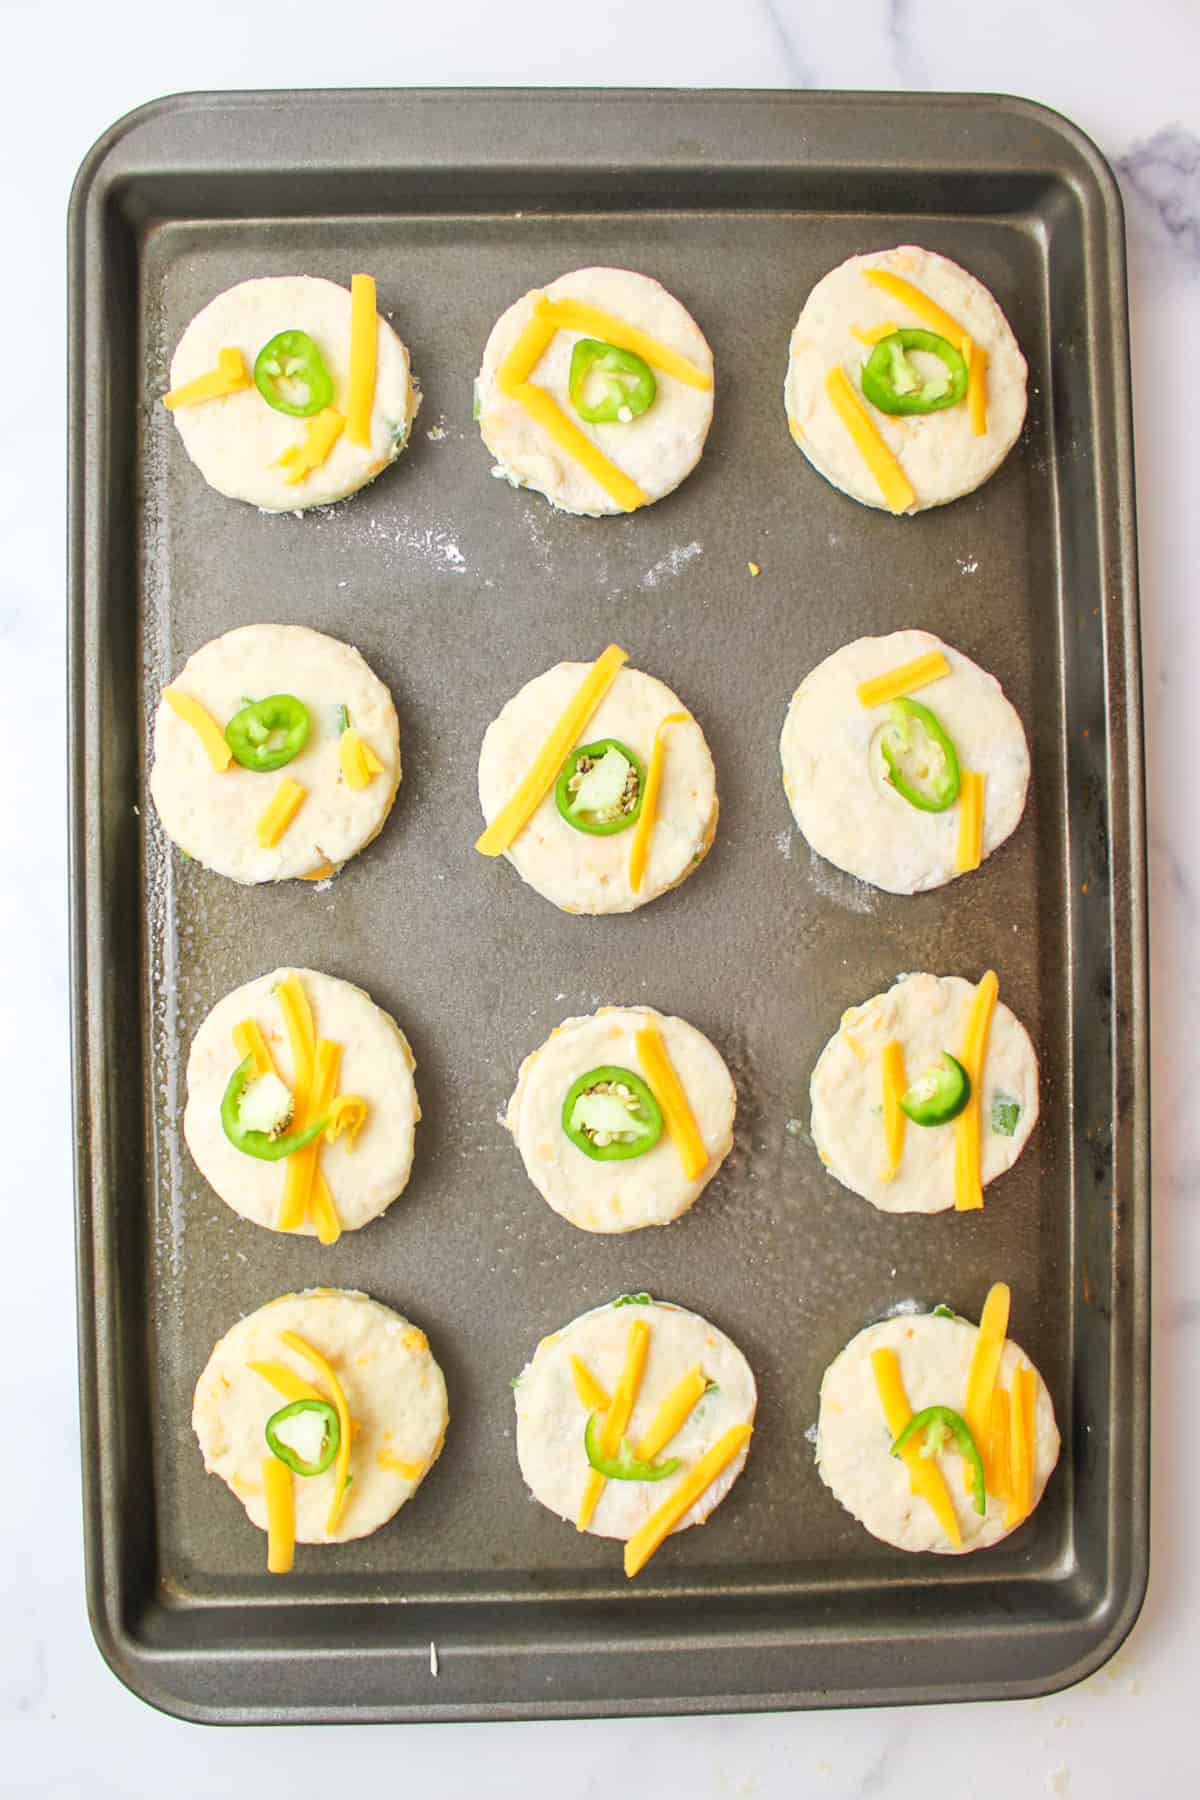 Jalapeno cheddar biscuits topped with shredded cheese and sliced jalapenos on a baking sheet